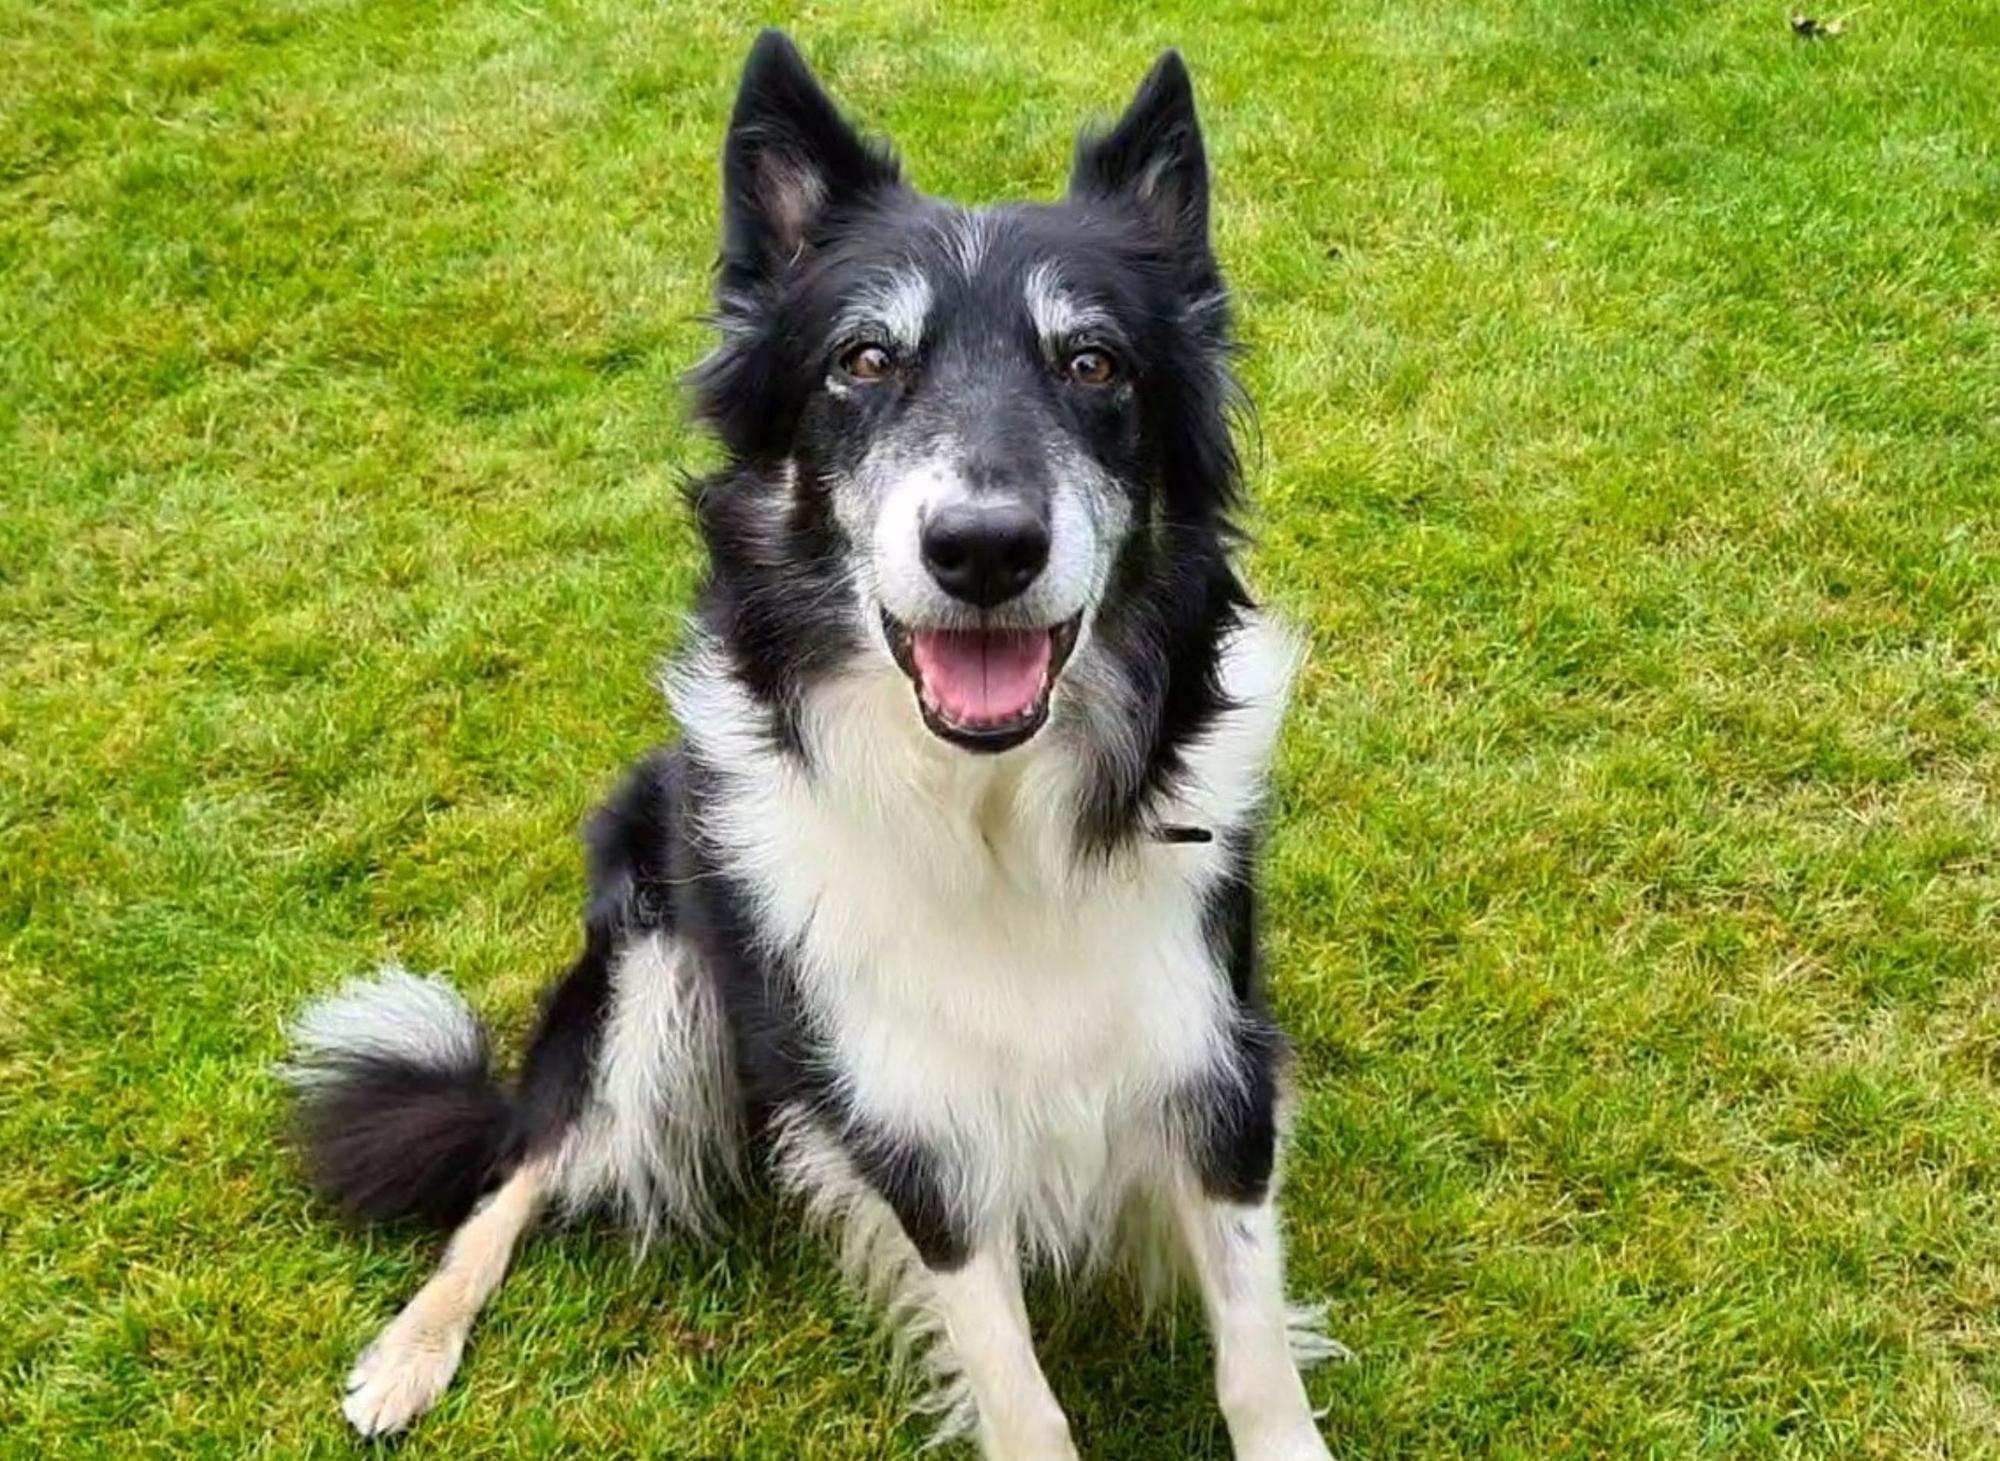 Edinburgh rescue dogs: Border Collie May at Dogs Trust West Calder  is waiting for her new home